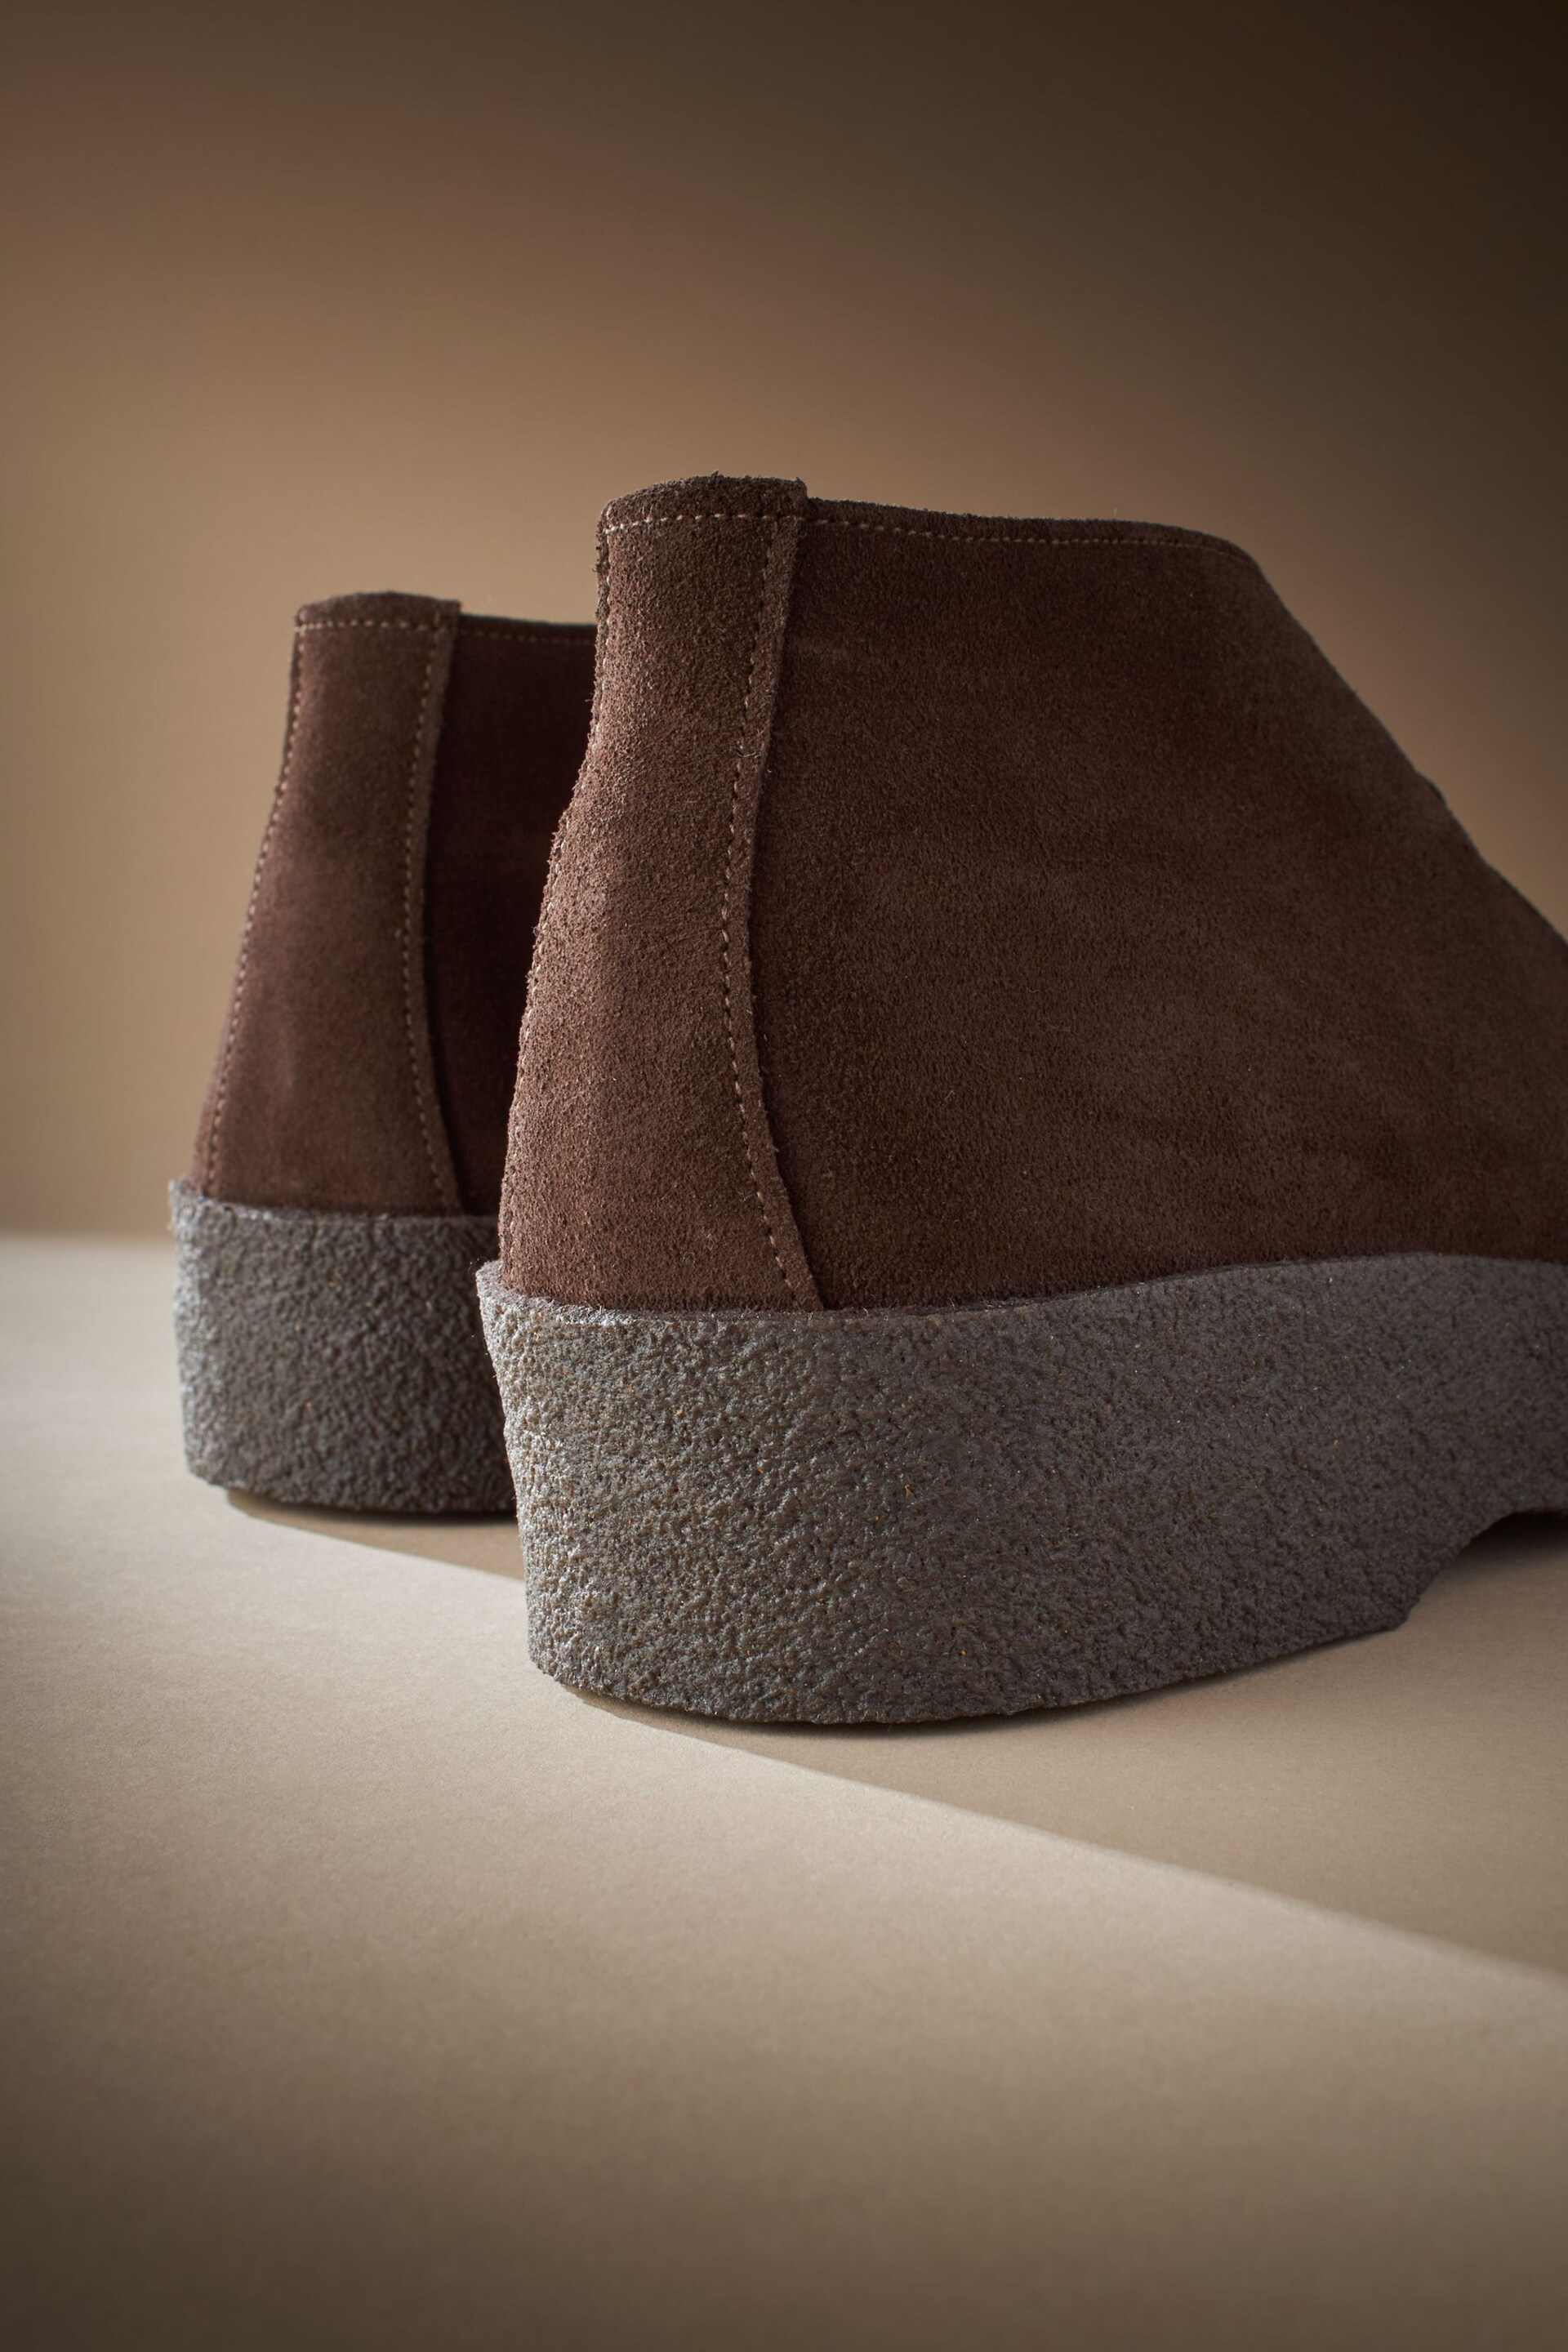 Brown Suede Sanders for Next Crepe Chukka Boots - Image 8 of 8